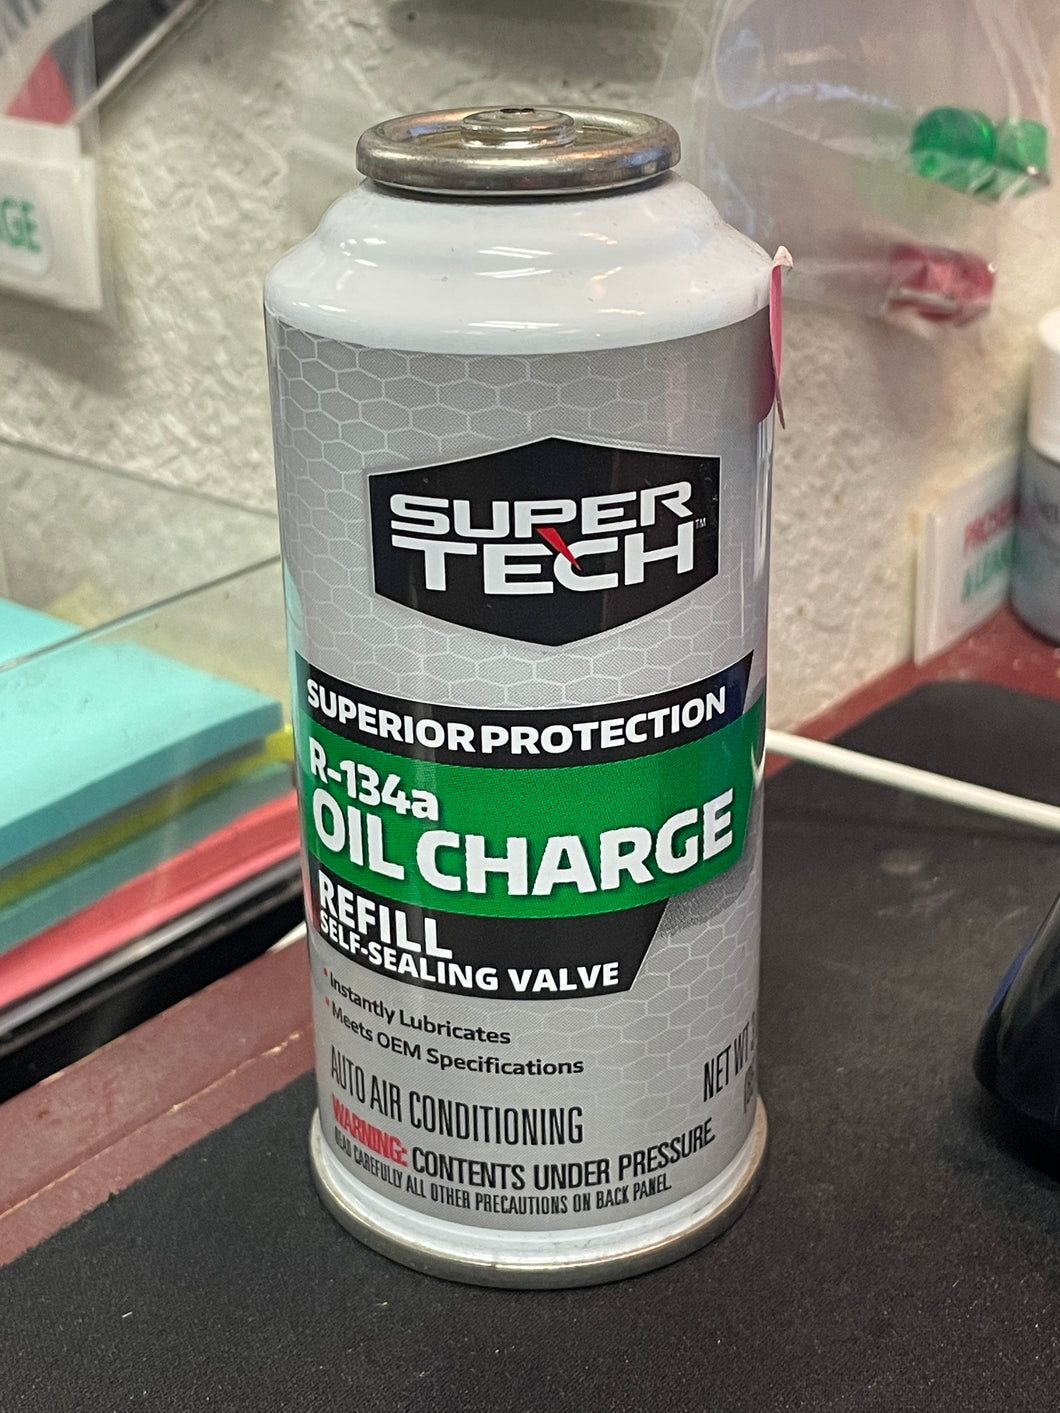 R134a Oil Charge, with the New Self Sealing Valve, 3 oz. Can Super-Tech